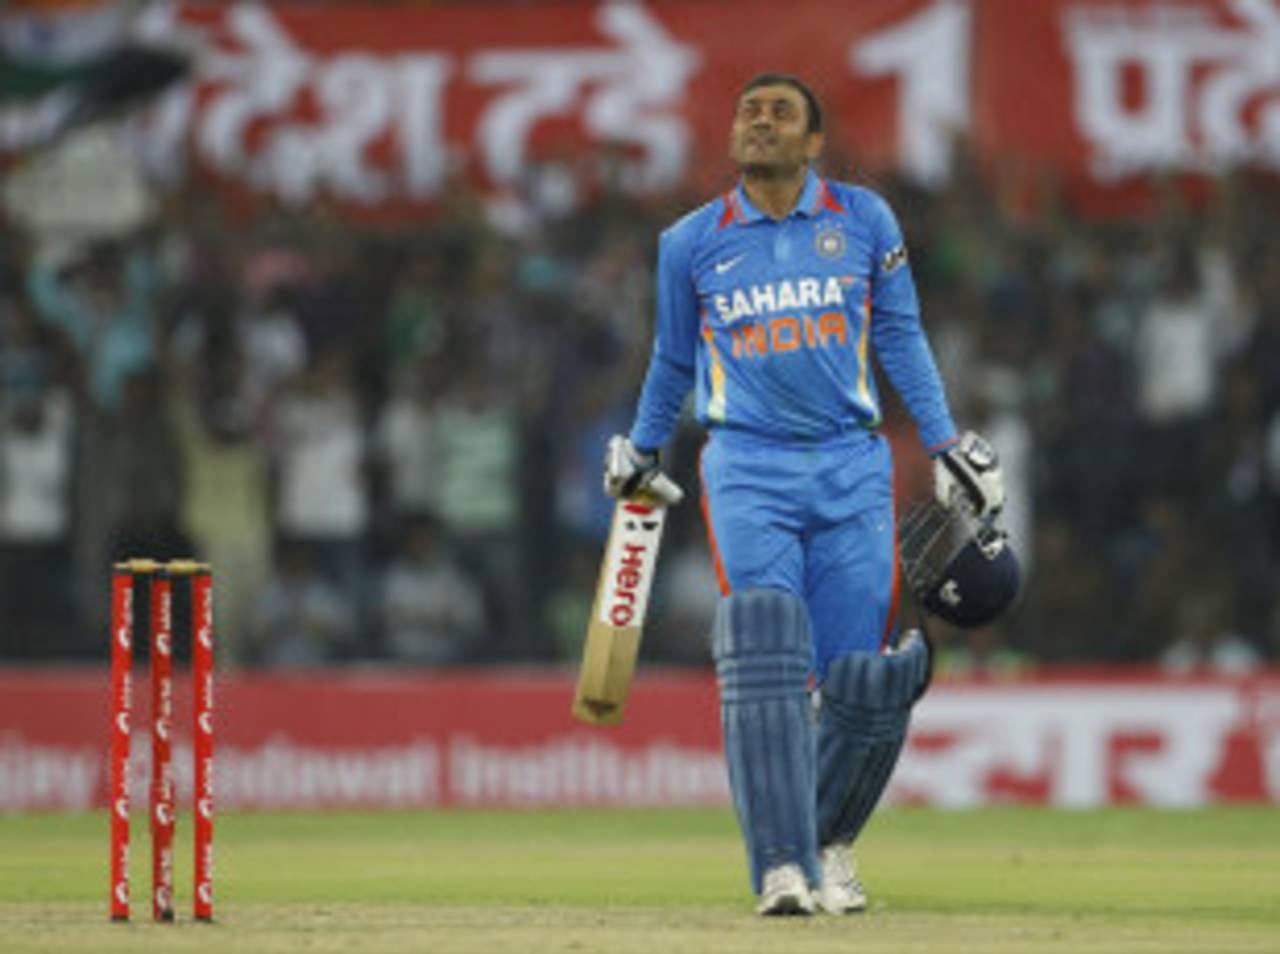 Virender Sehwag reacts after getting to a double-ton, India v West Indies, 4th ODI, Indore, December 8, 2011